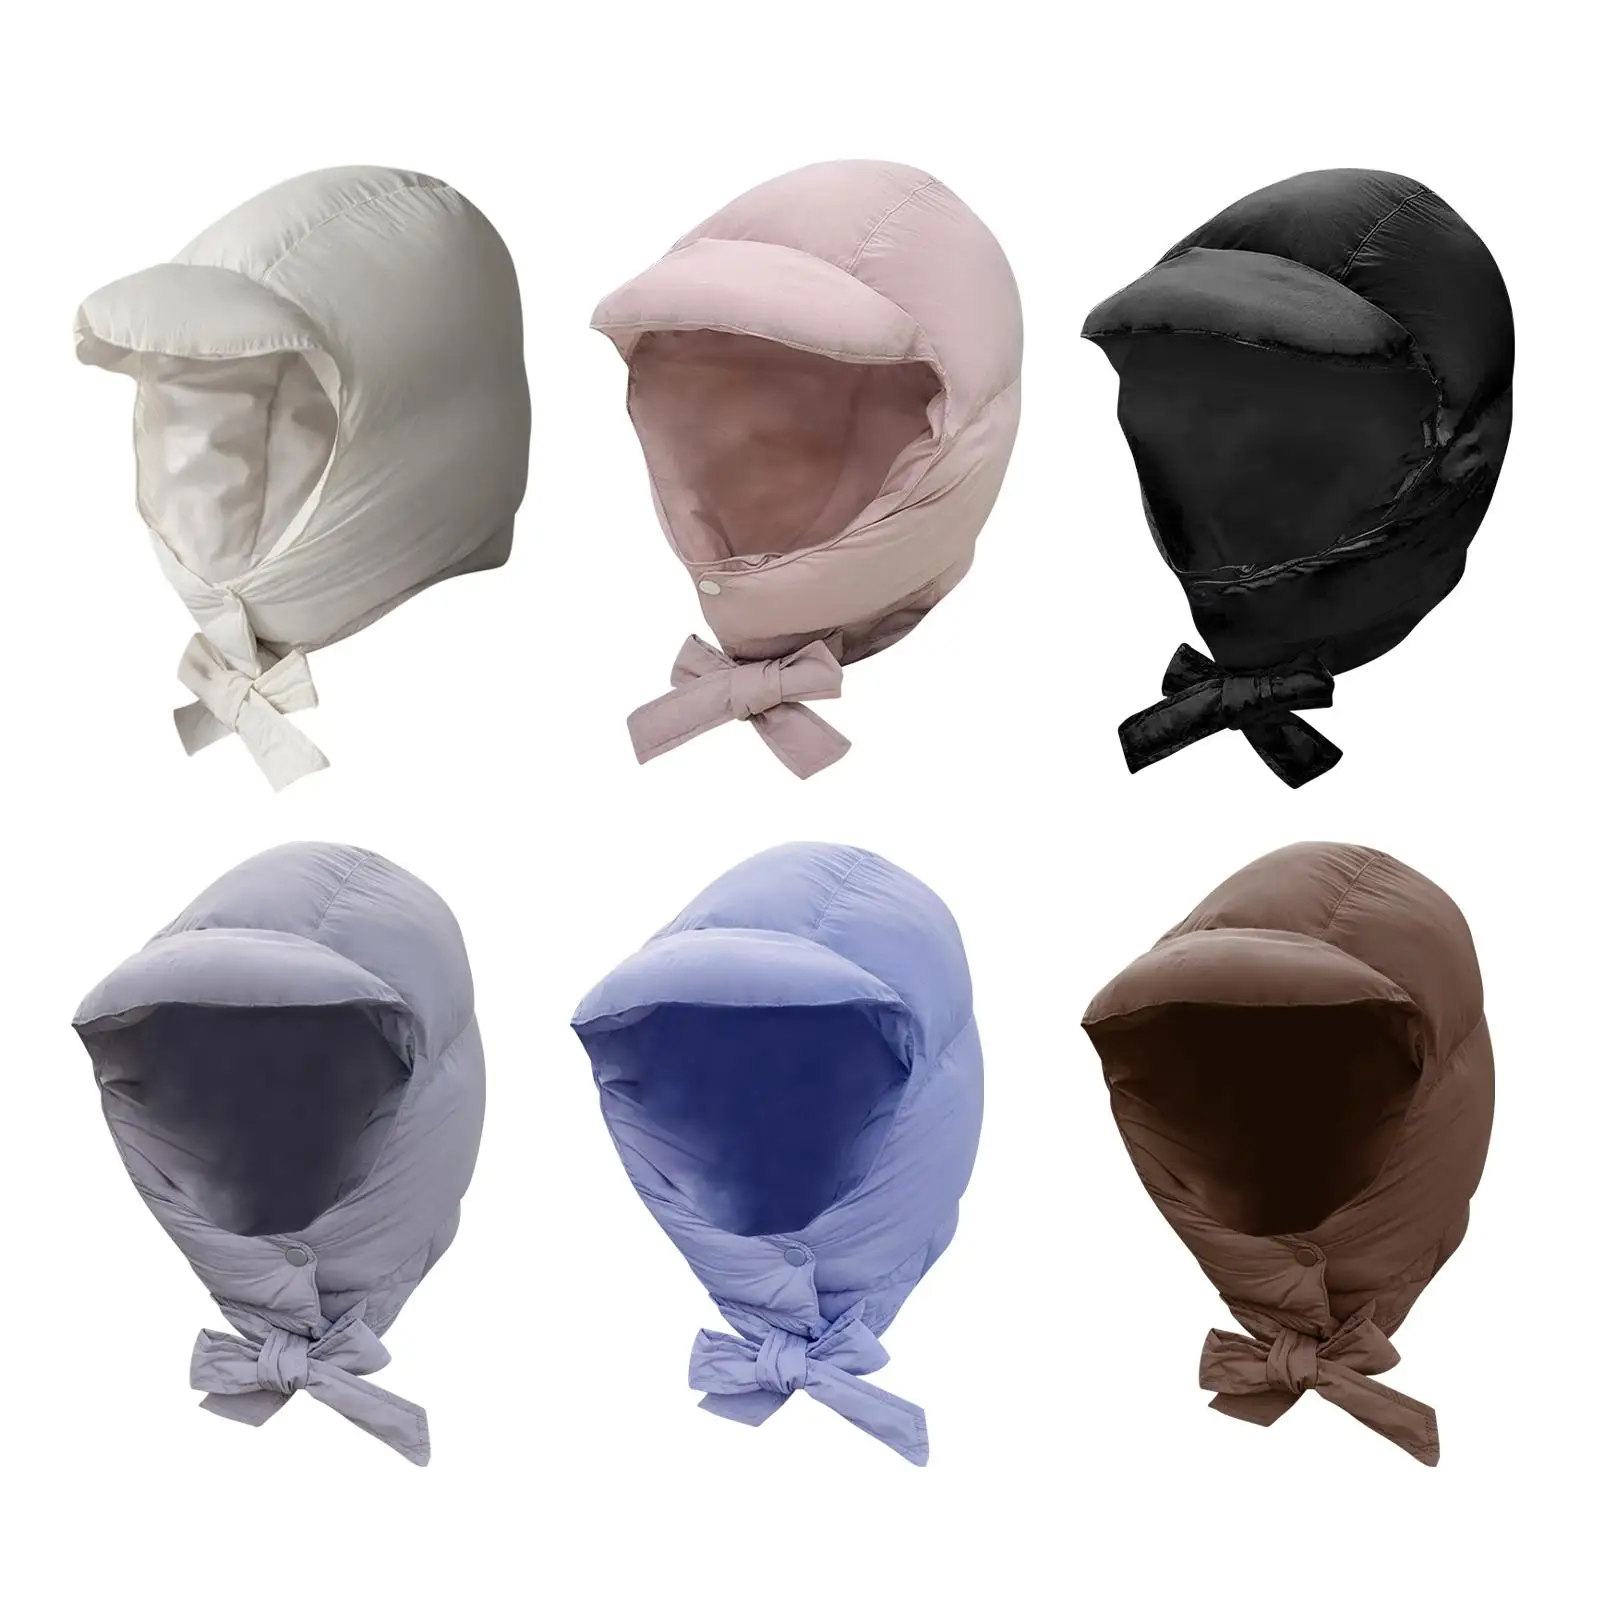 Down Hat with Earflaps Thickened Winter Hat for Skiing Climbing Snow Sports